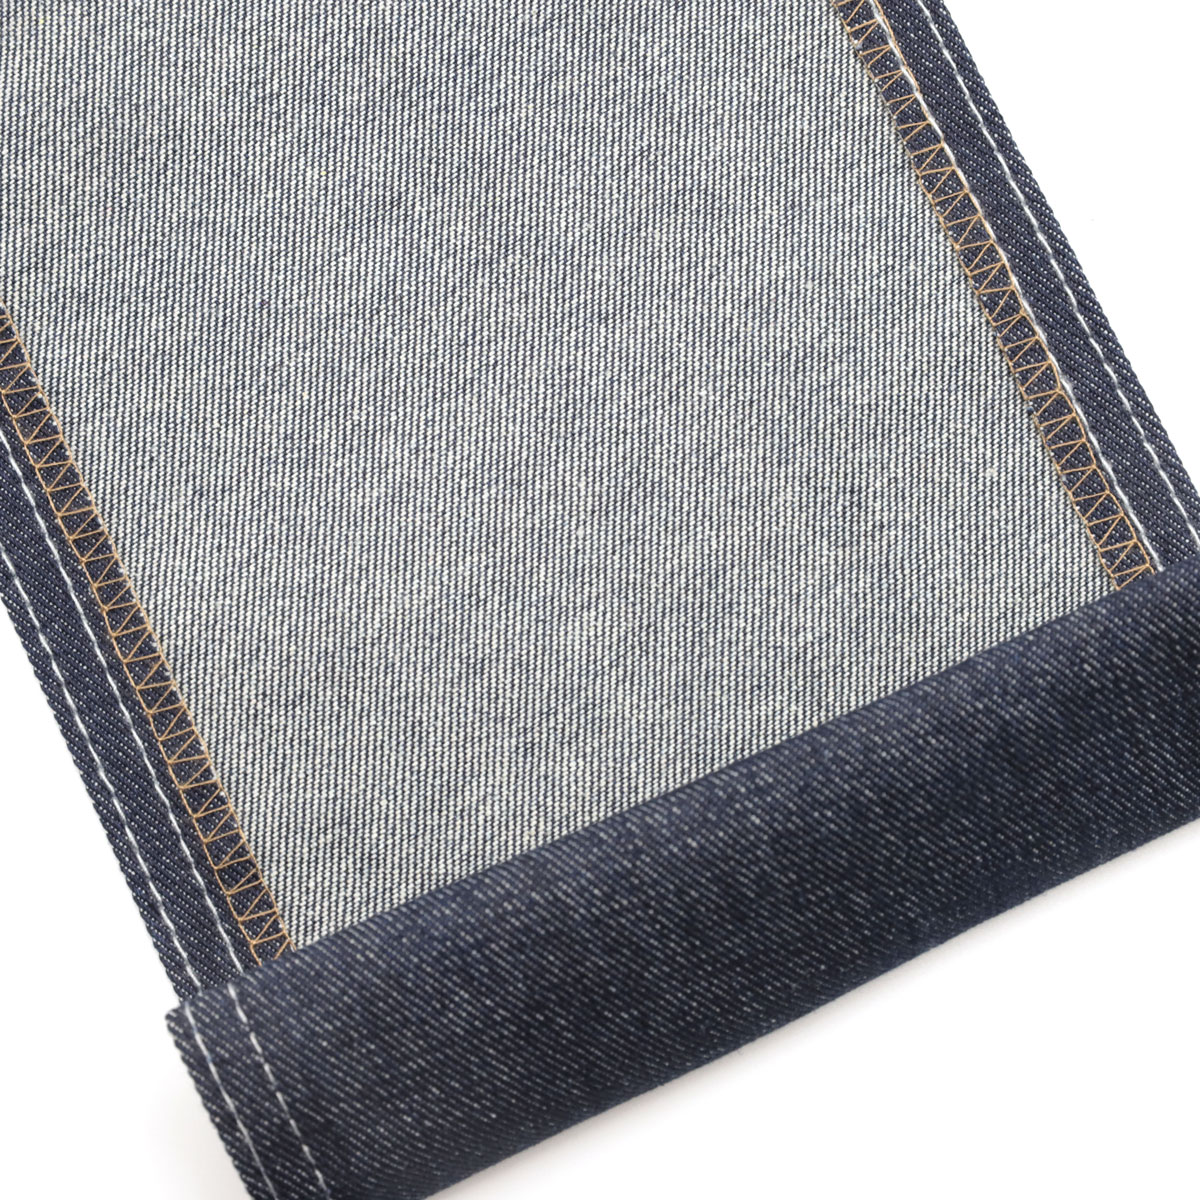 How to Find Best Denim Fabric Mills Products 1